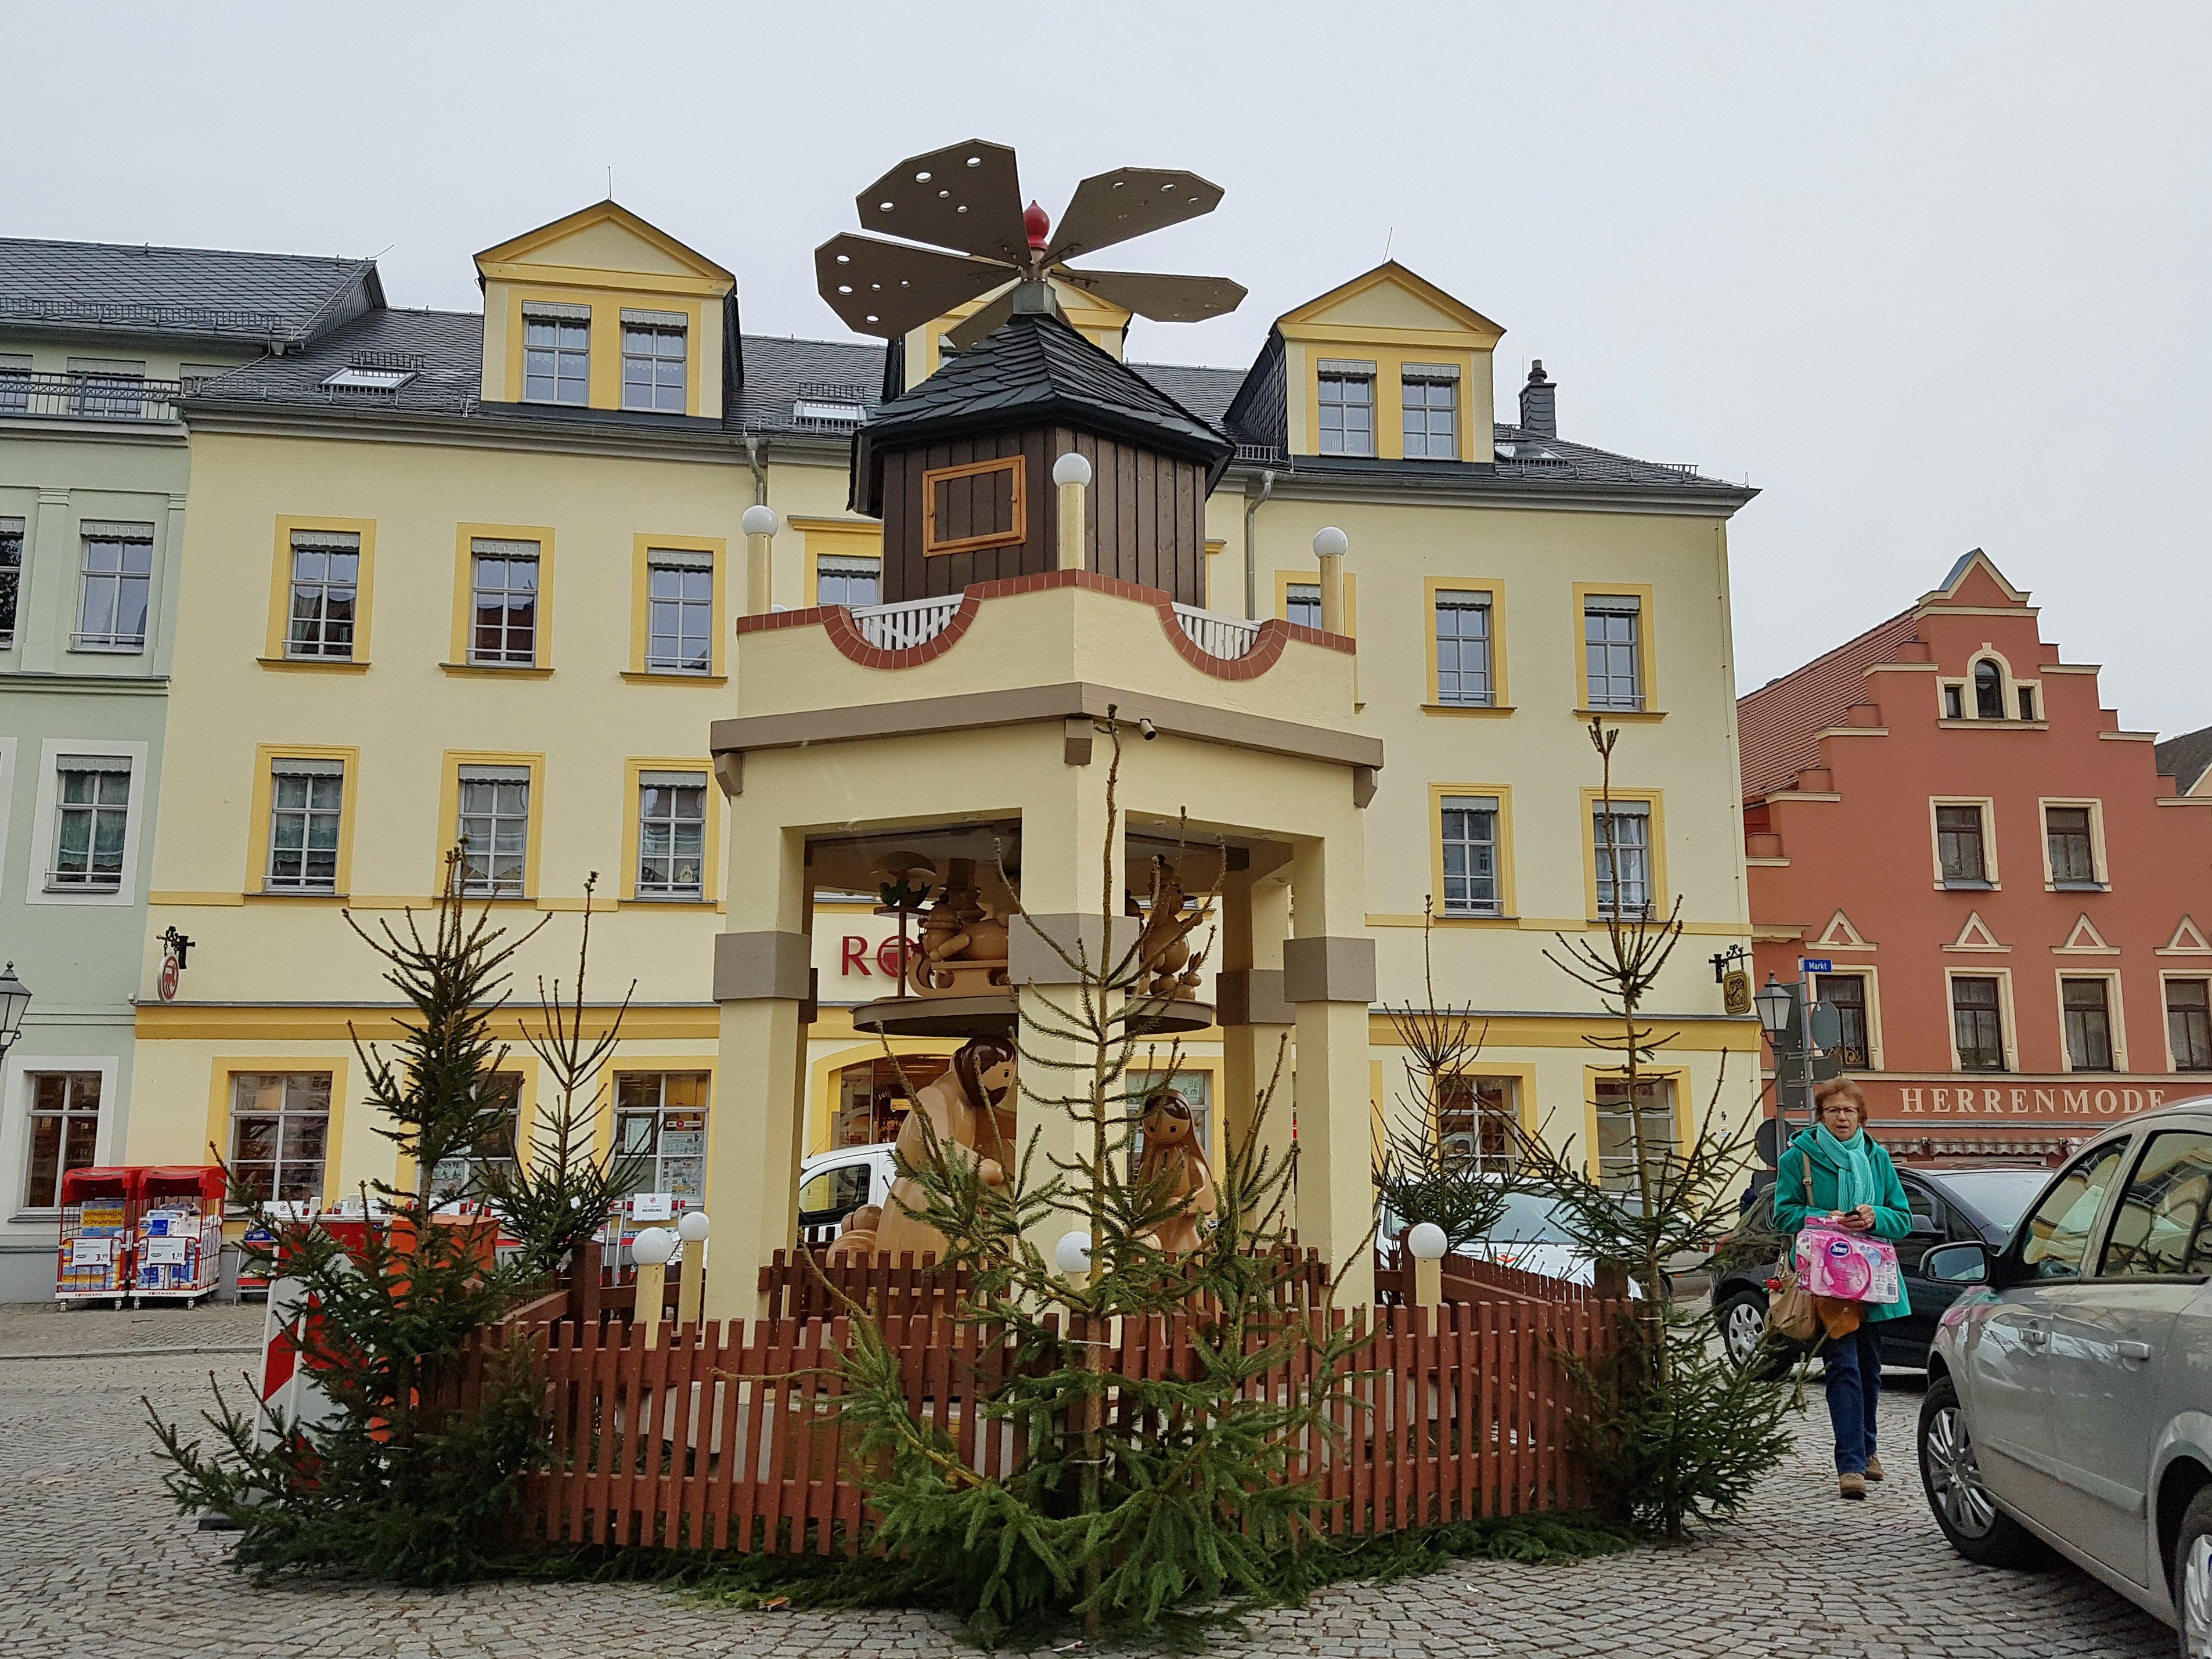 FREEHOLD MULTI APARTMENT BLOCK IN THE HISTORIC TOWN OF HAINICHEN, GERMANY